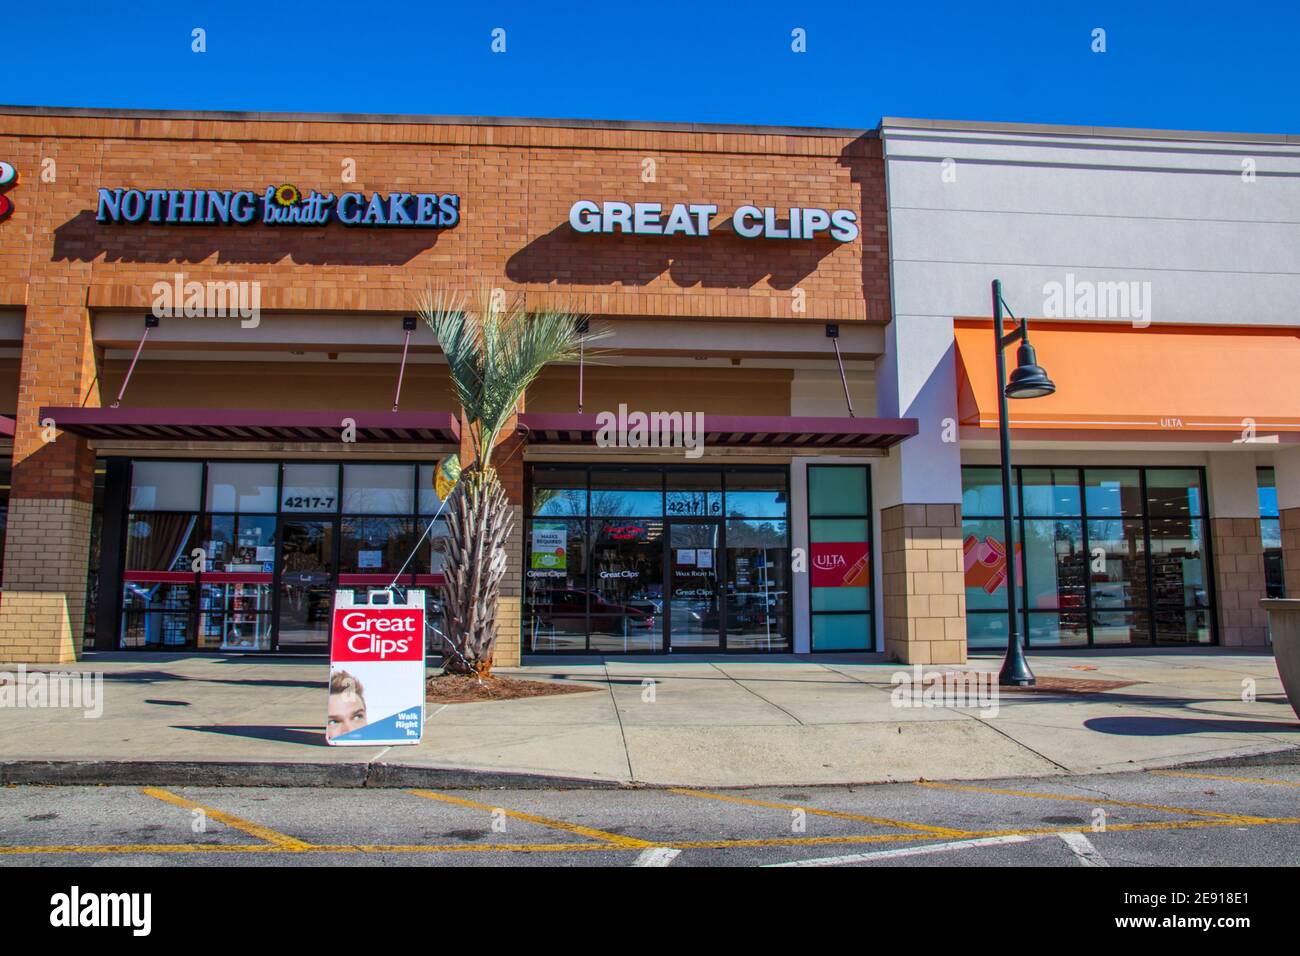 Augusta, Ga USA - 01 28 21: Strip mall Great Clips Nothing but Cakes front  view Stock Photo - Alamy